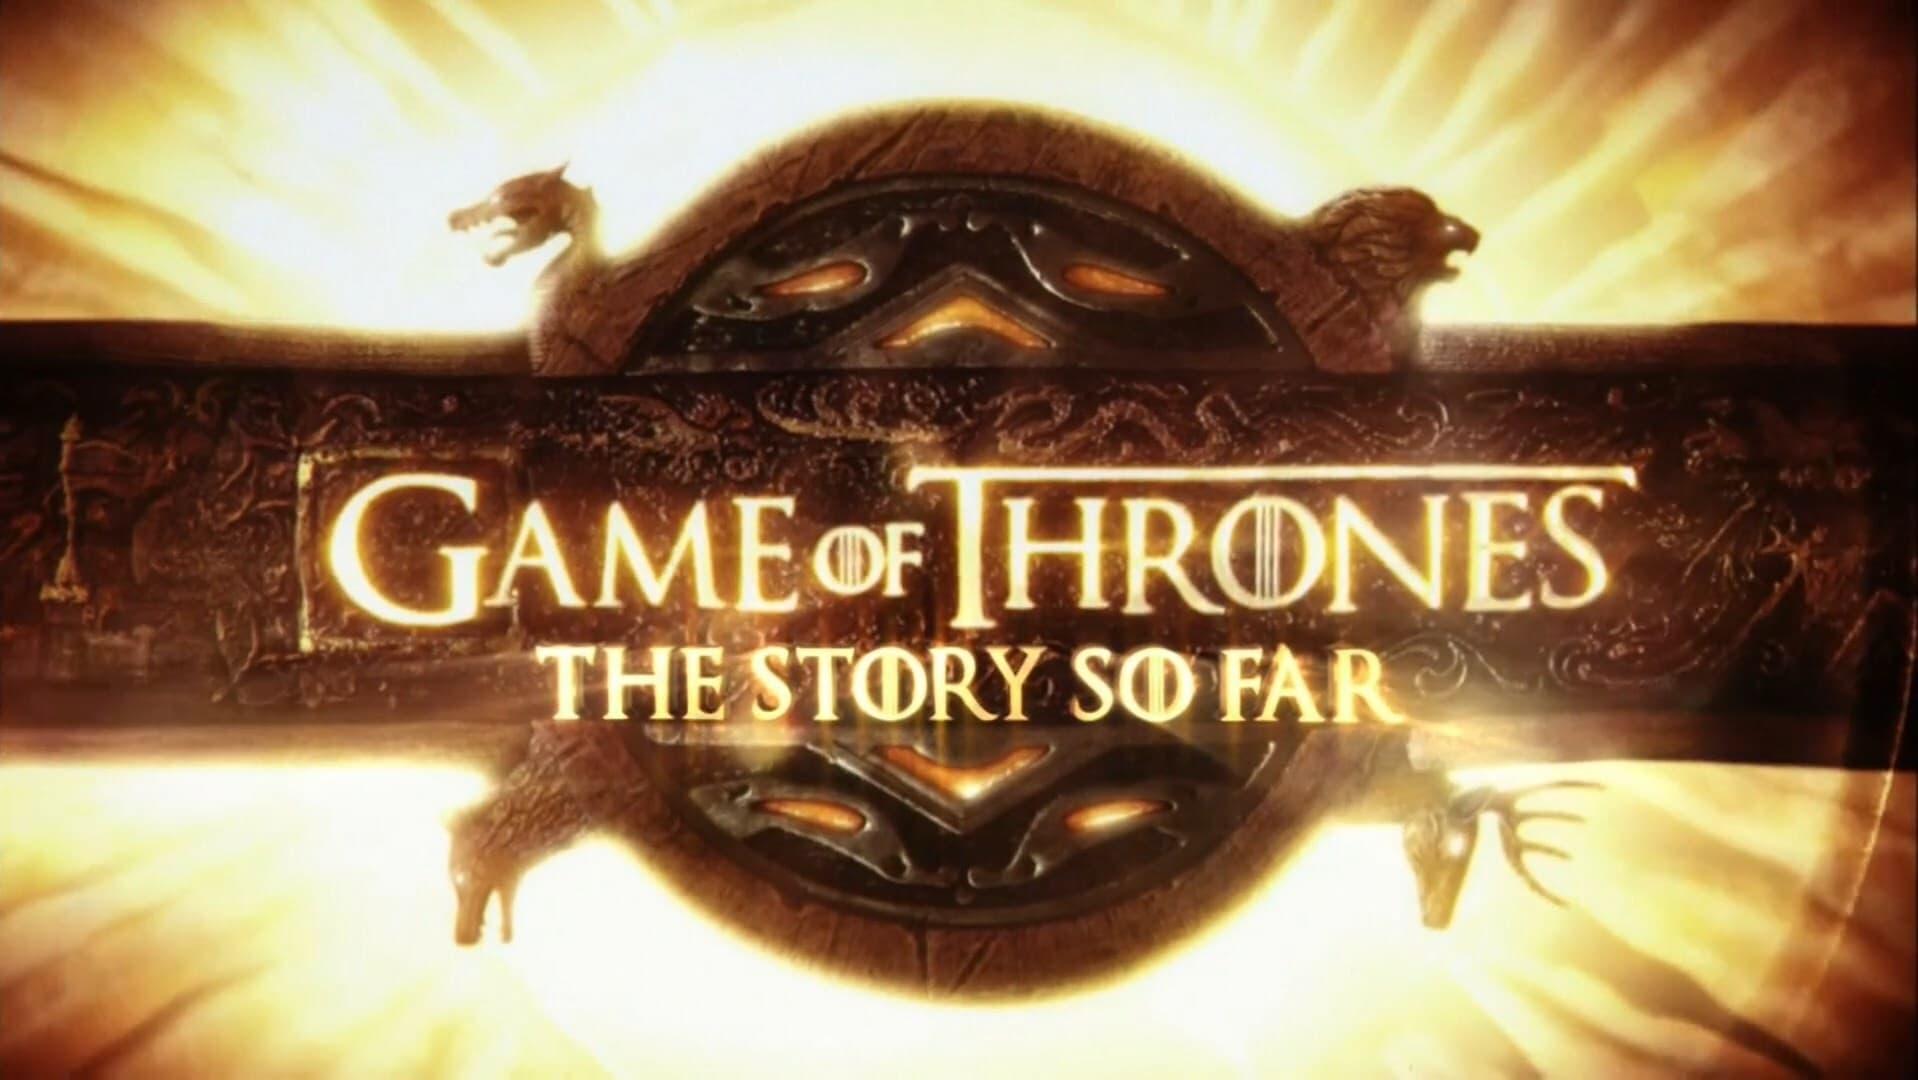 Game of Thrones: The Story So Far backdrop